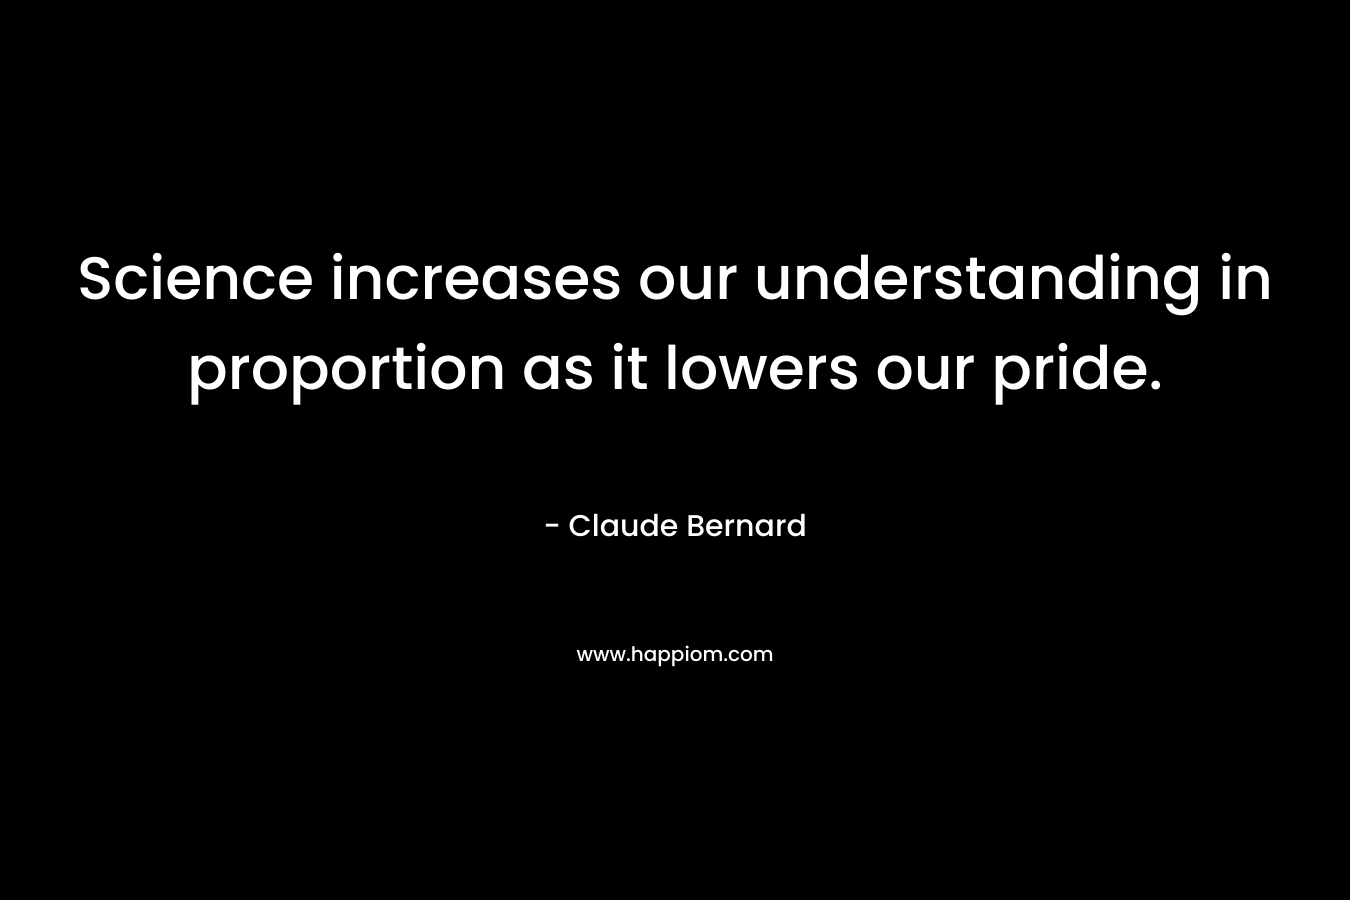 Science increases our understanding in proportion as it lowers our pride.